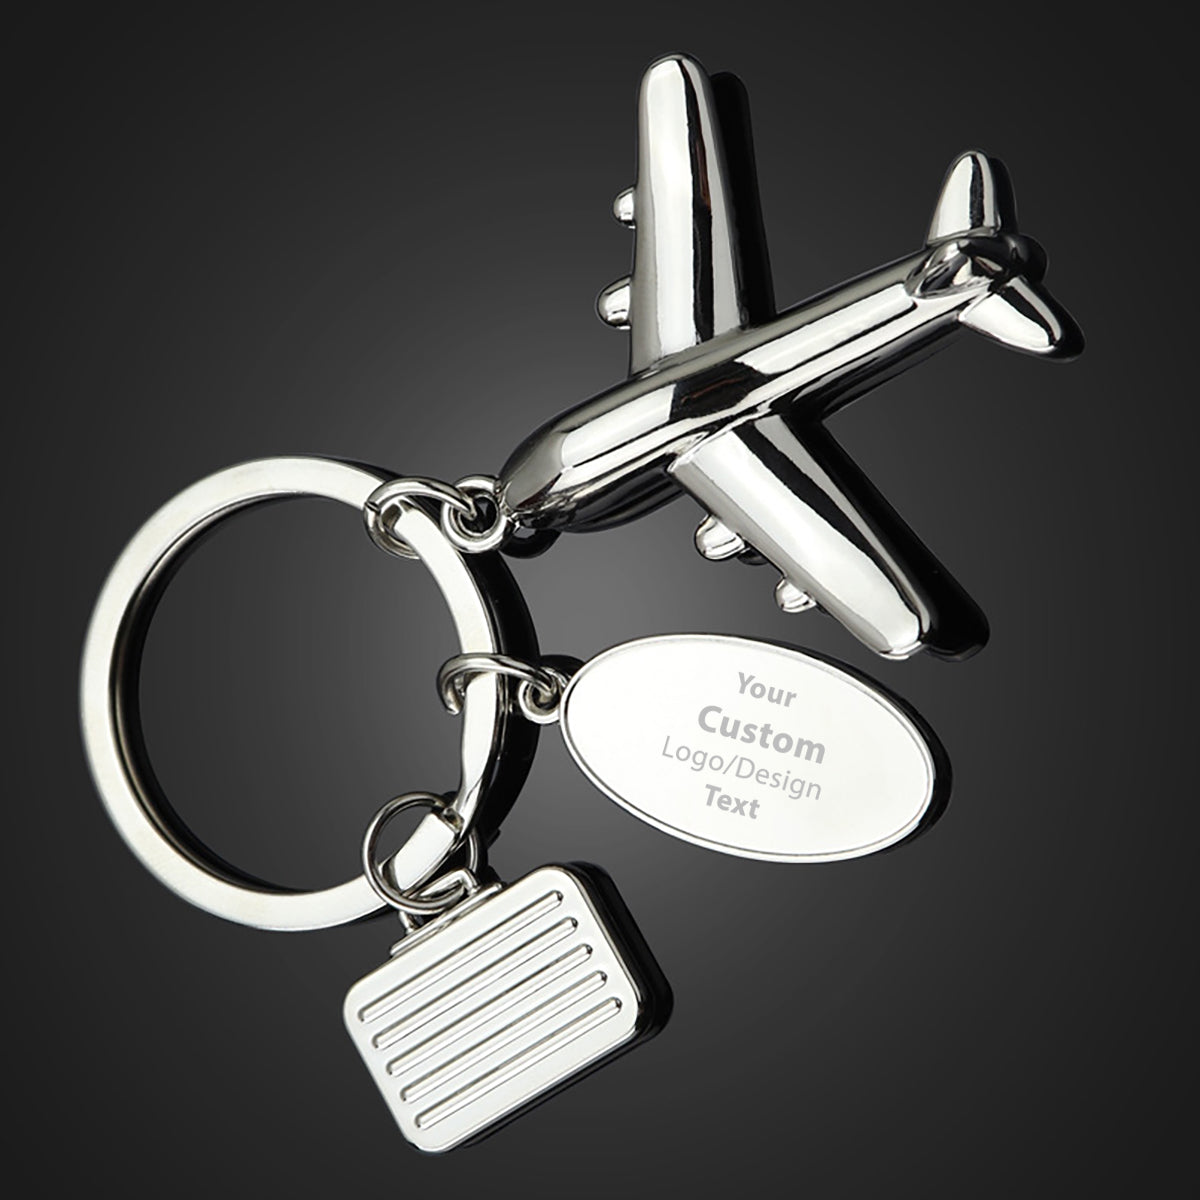 Your Custom Design & Image & Logo & Text Designed Suitcase Airplane Key Chains